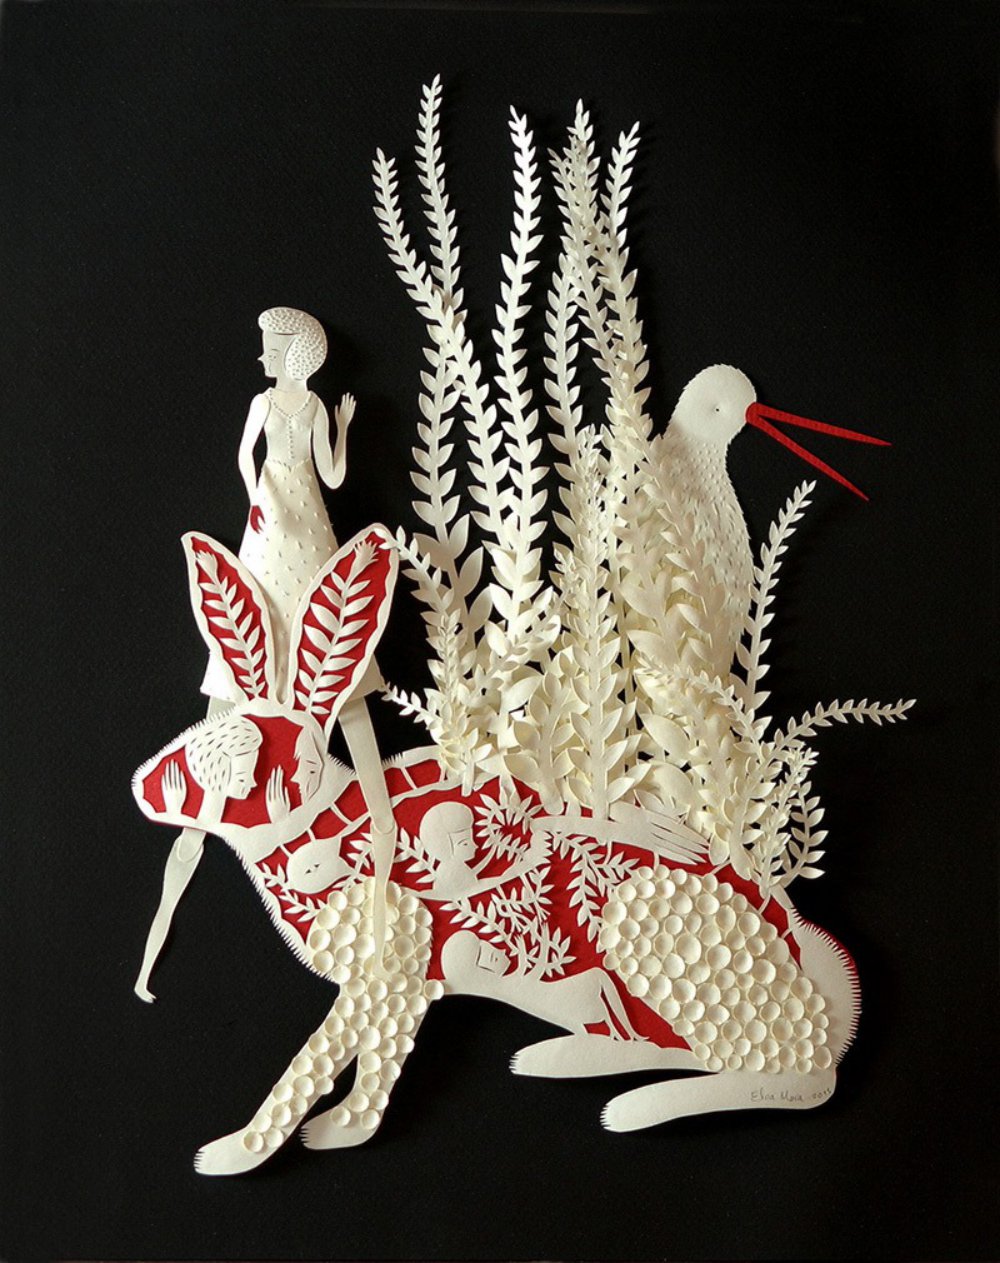 Intricate paper art pieces by Elsa Mora